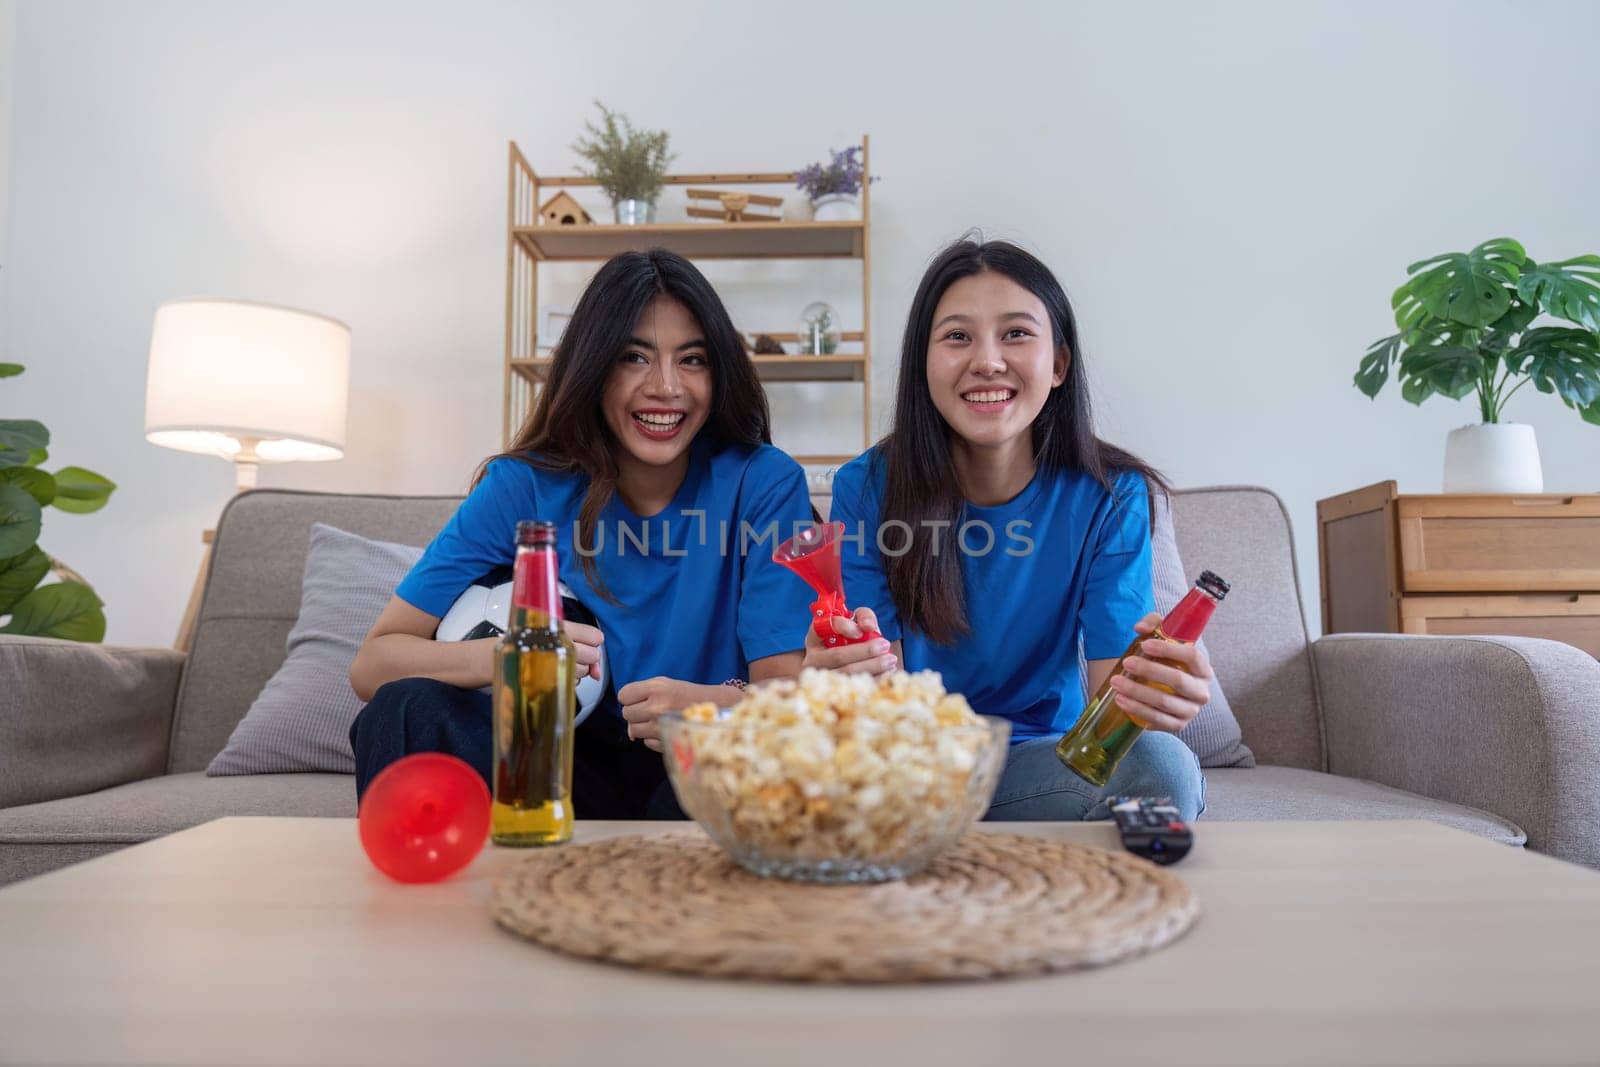 Lesbian couple cheering for Euro football with drinks and popcorn at home. Concept of sports enthusiasm and LGBTQ pride.